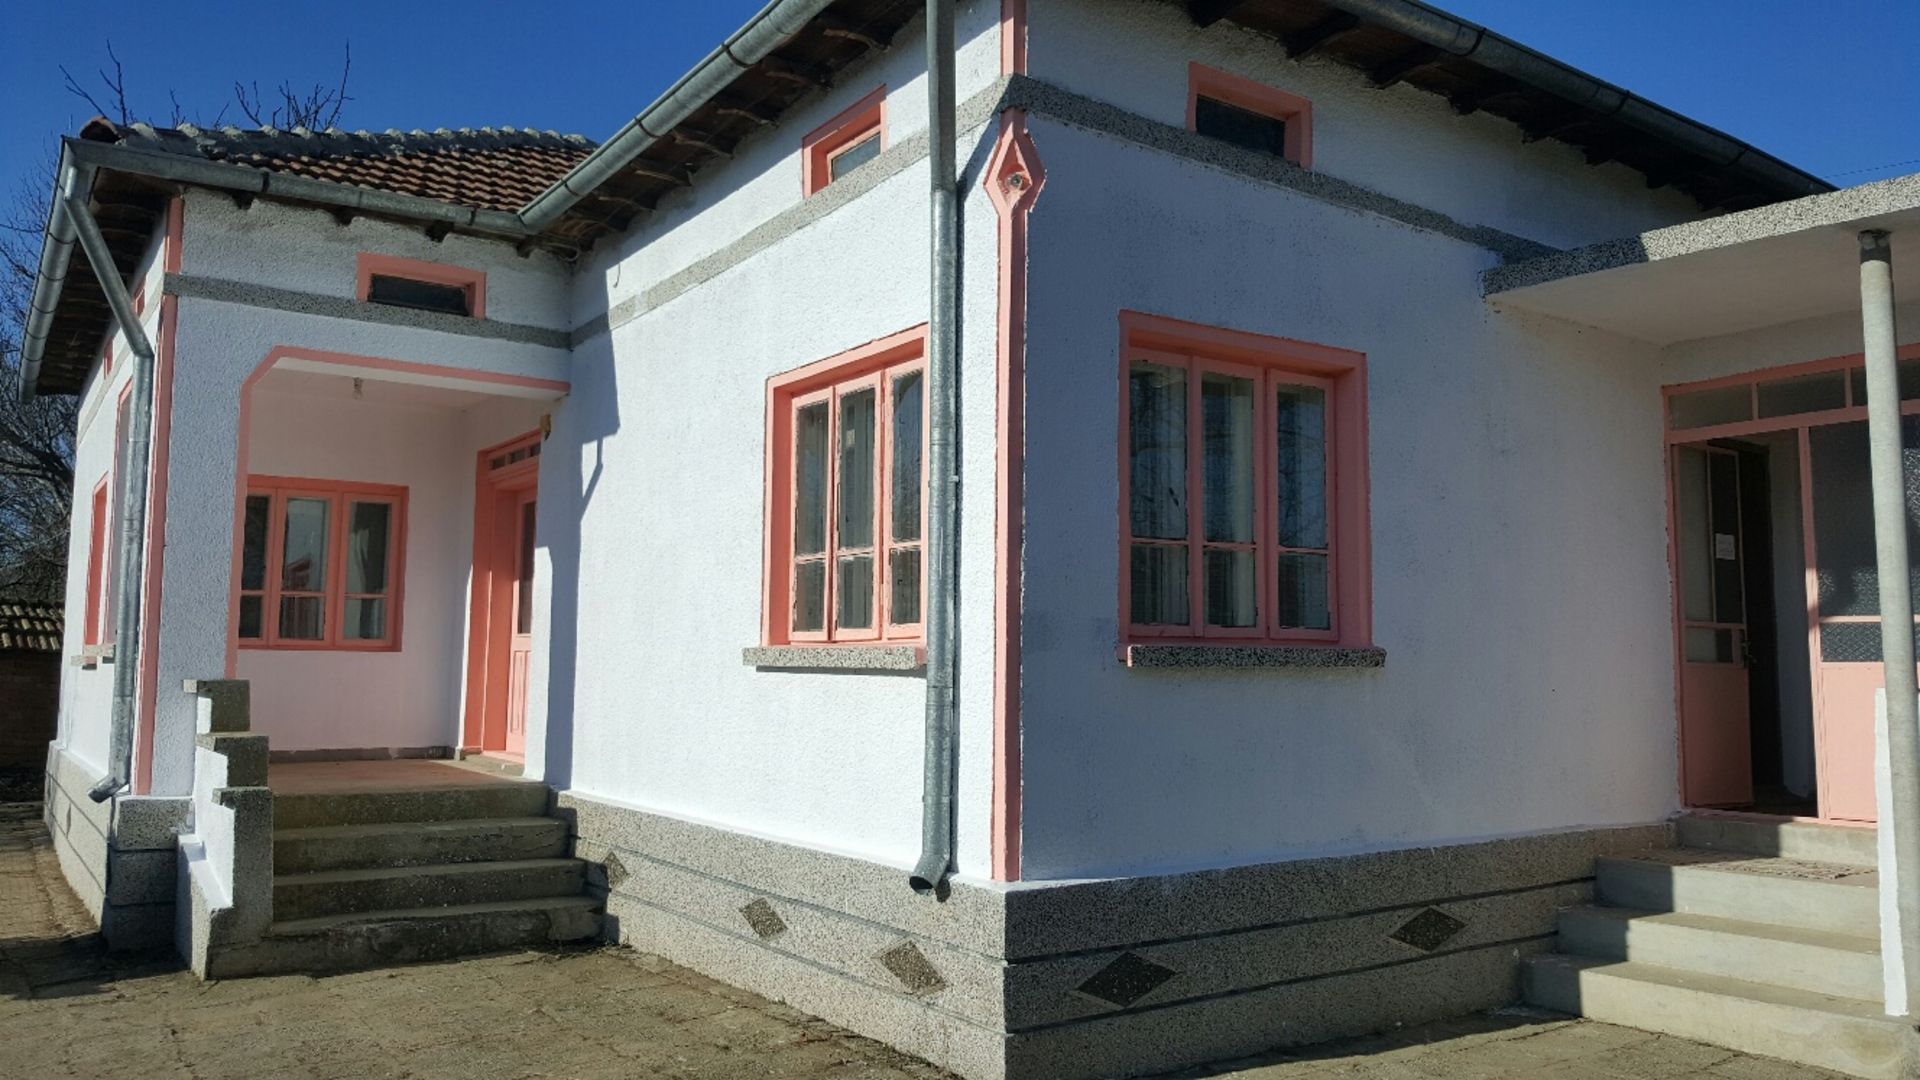 Ready to move into 5 room Bulgarian cottage for sale. With land not far from coast - Image 7 of 42